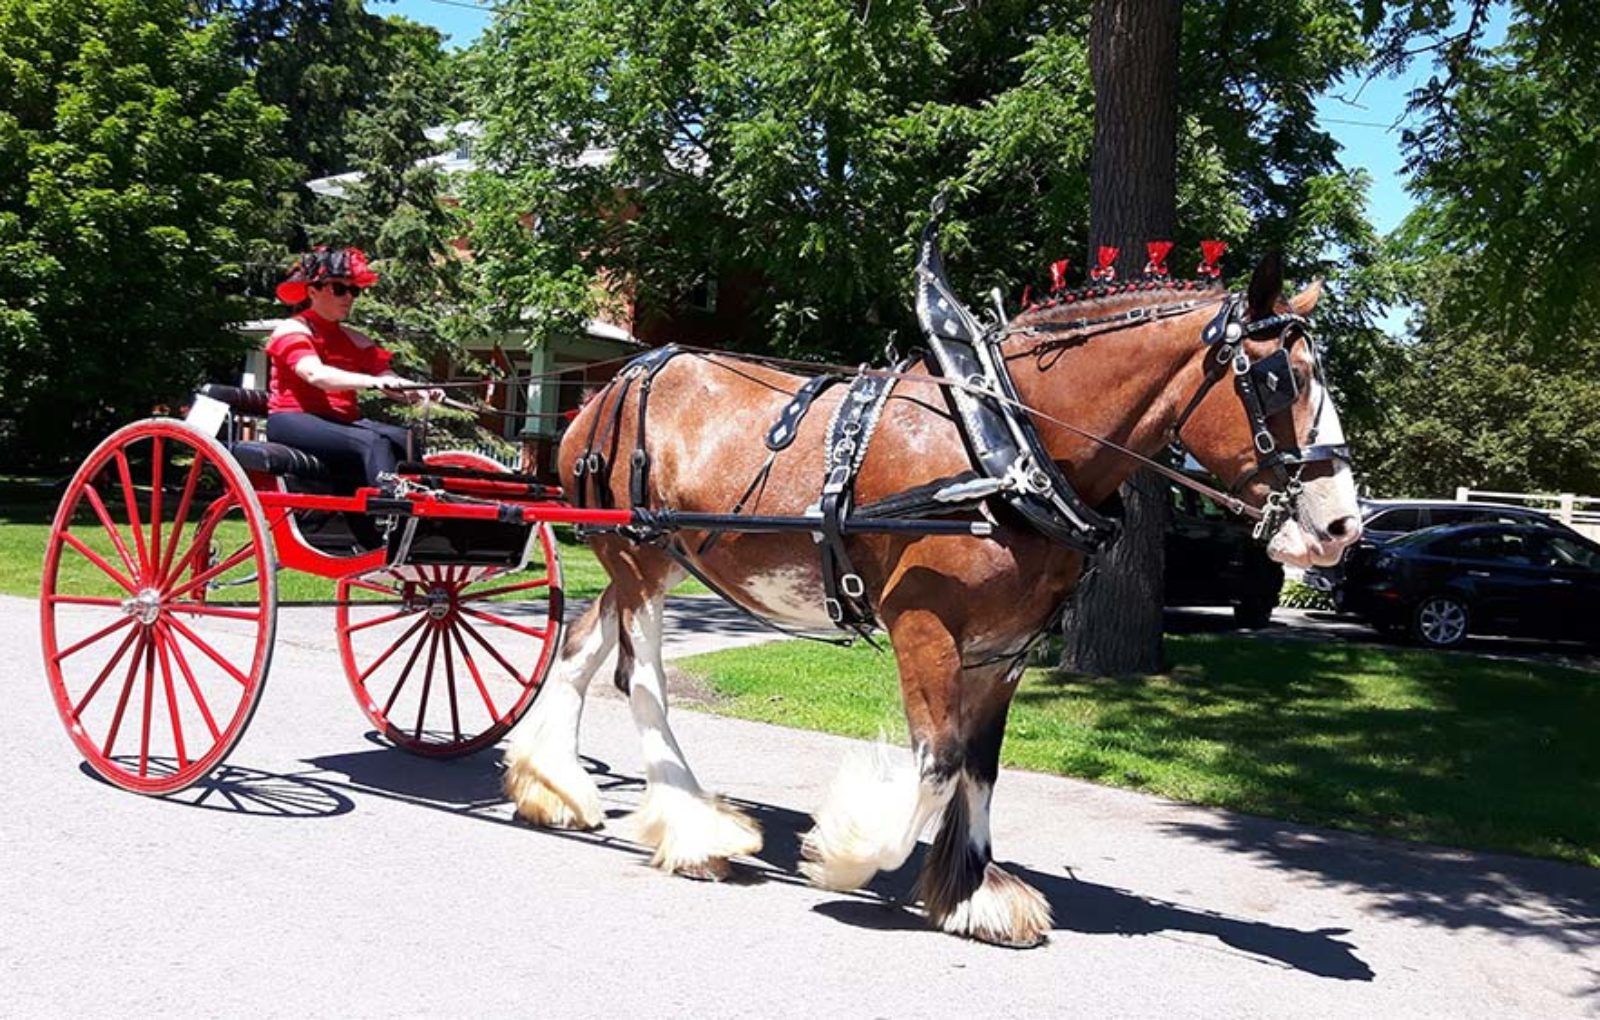 LS_July 10 2019 Horse and Buggy Parade (40)